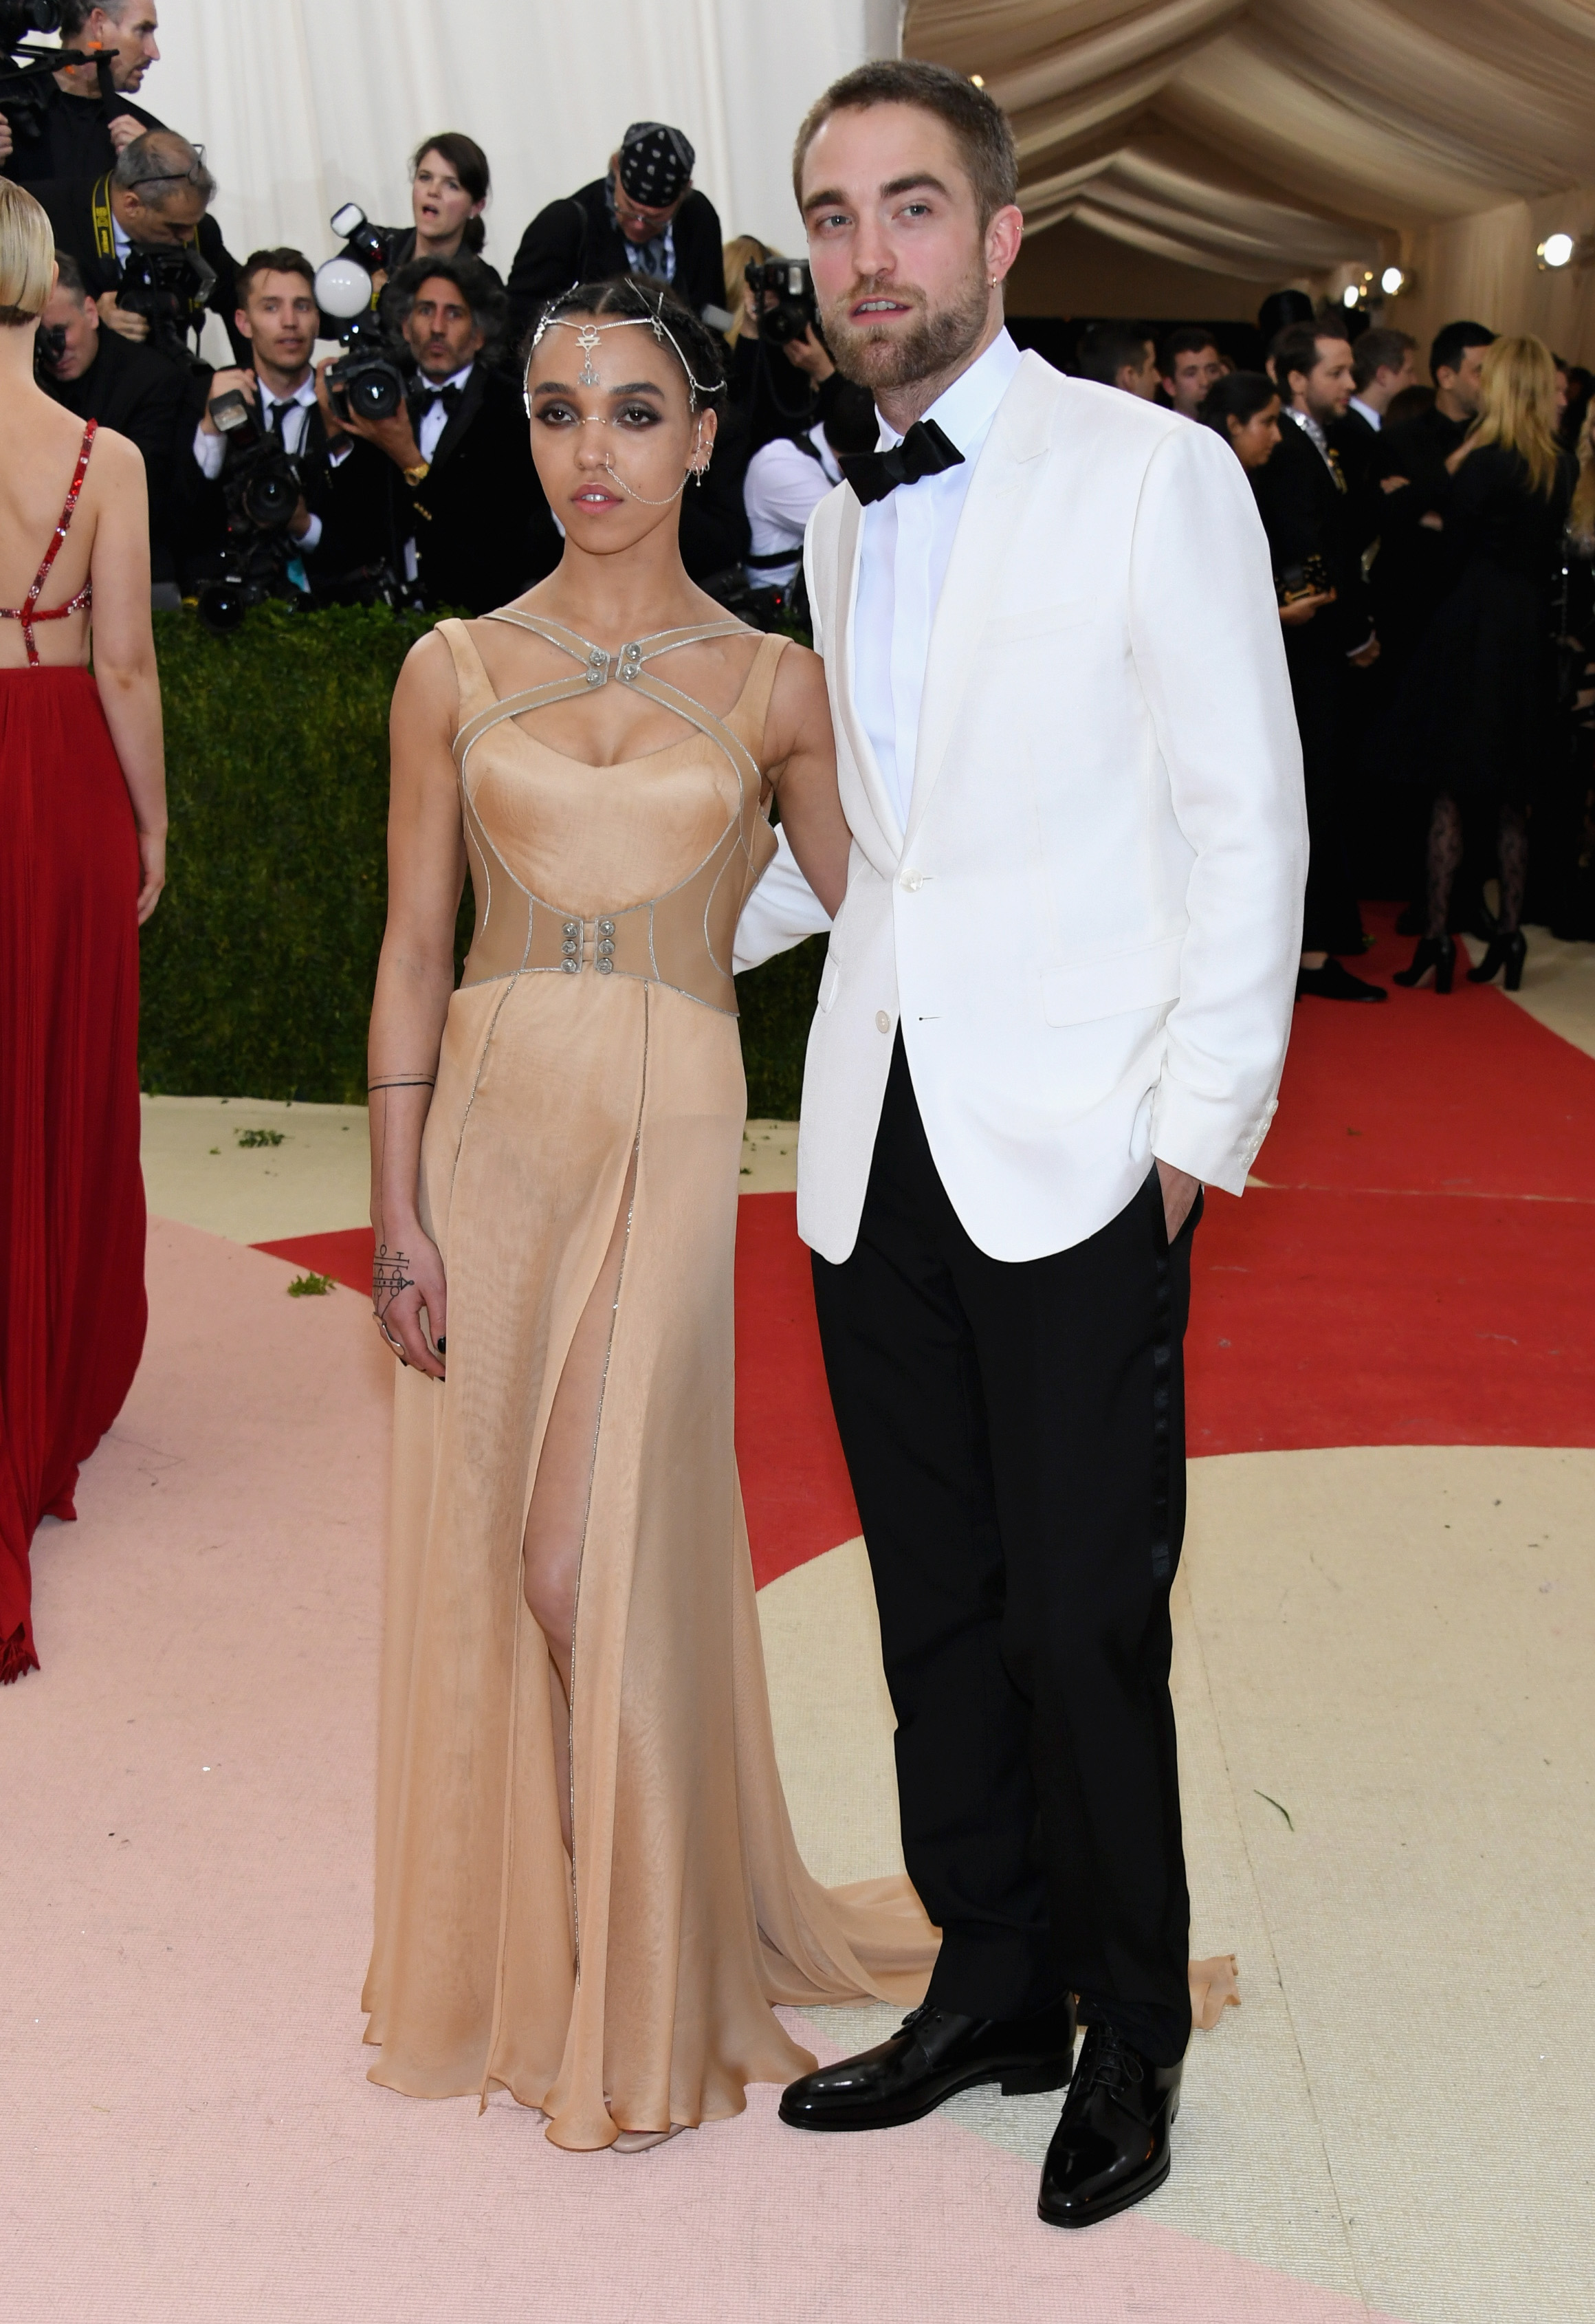 Robert Pattinson says he and FKA Twigs are 